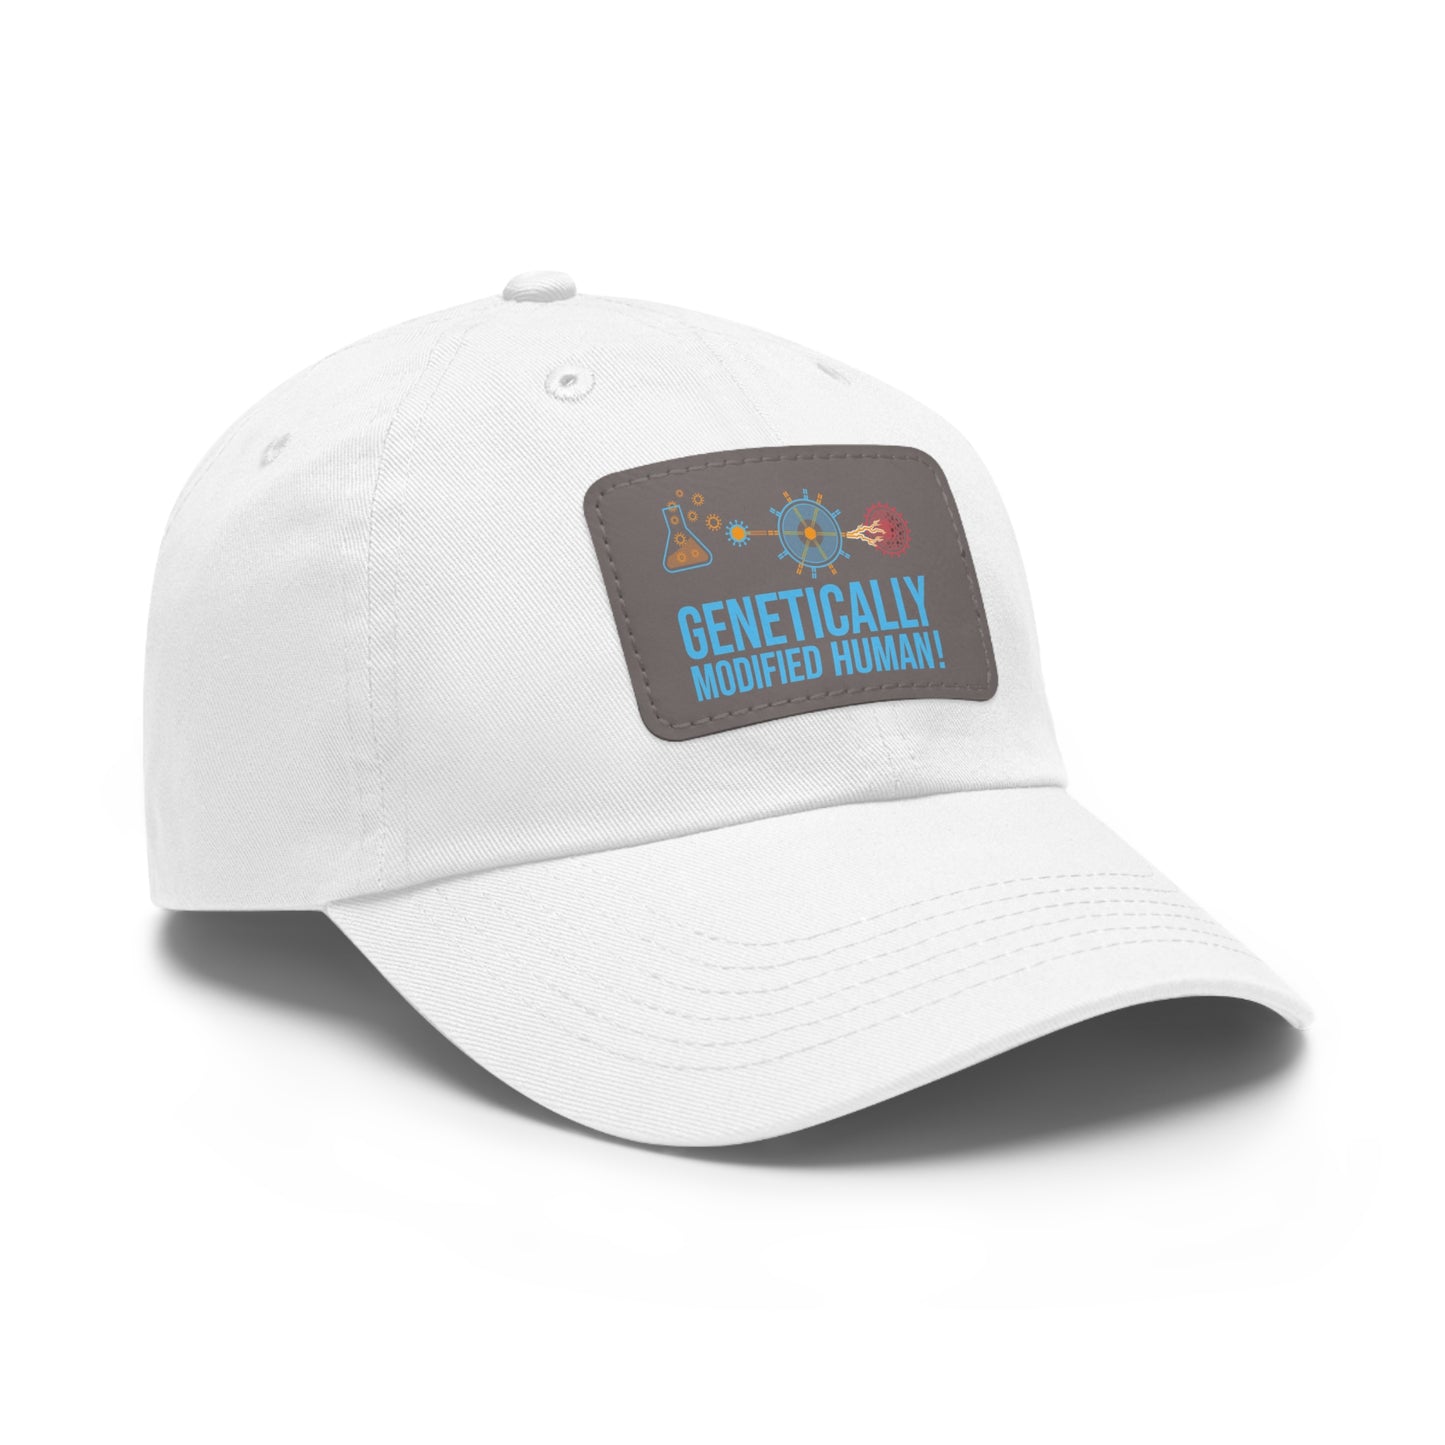 Genetically modified Human 2 Dad Hat with Leather Patch (Rectangle)